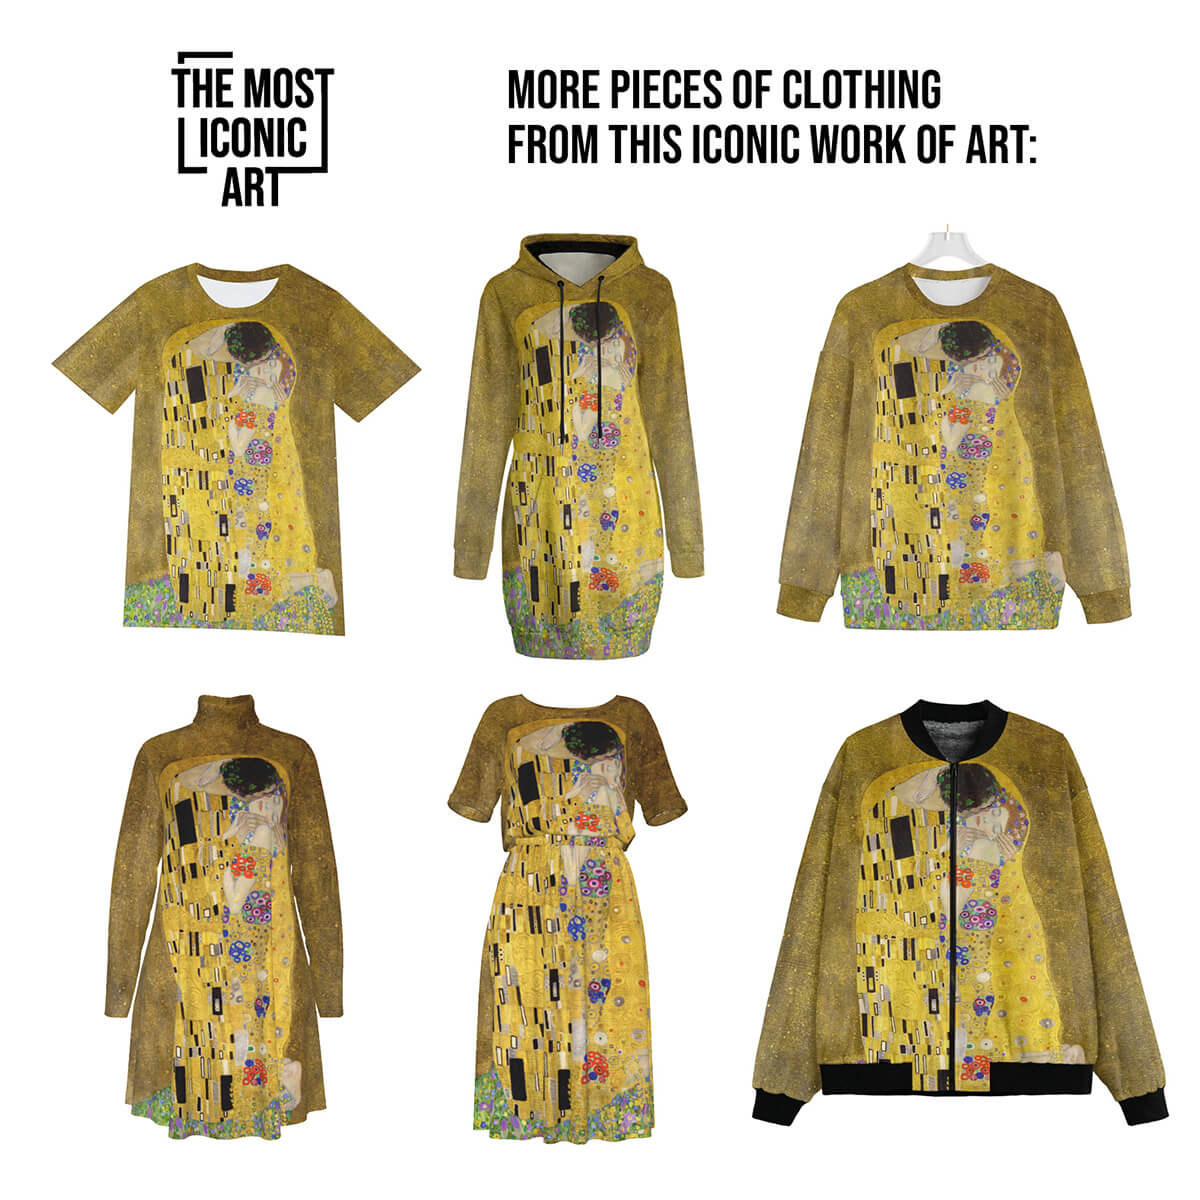 Perfect for art lovers and fashion enthusiasts alike